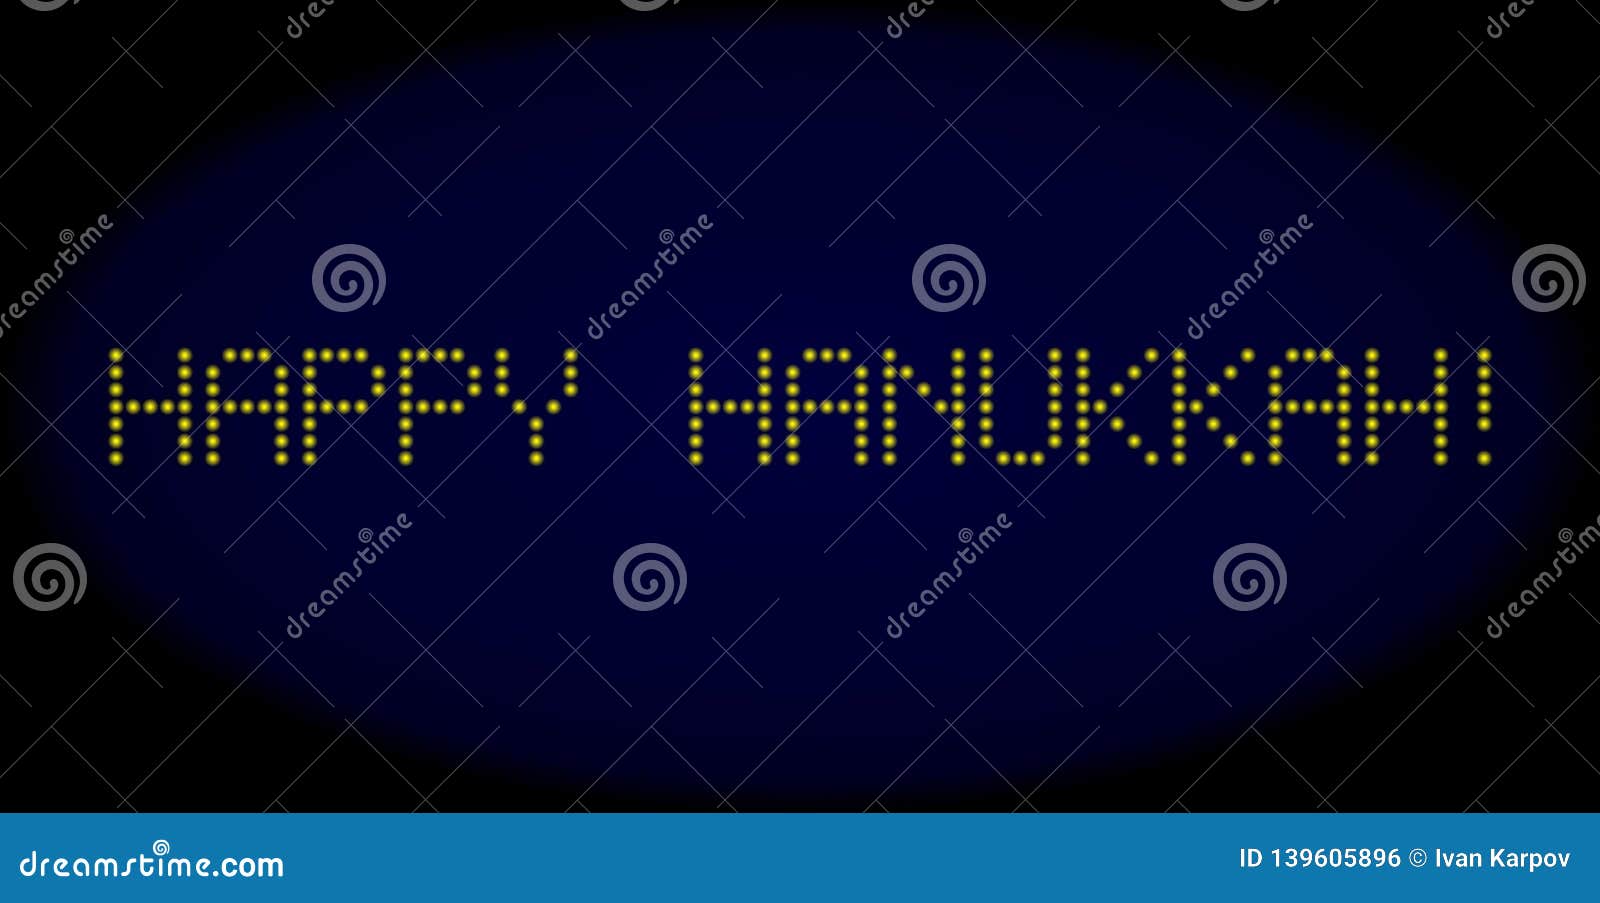 HAPPY HANUKKAH! Led Style Message with Glowing Dots Stock Vector ...